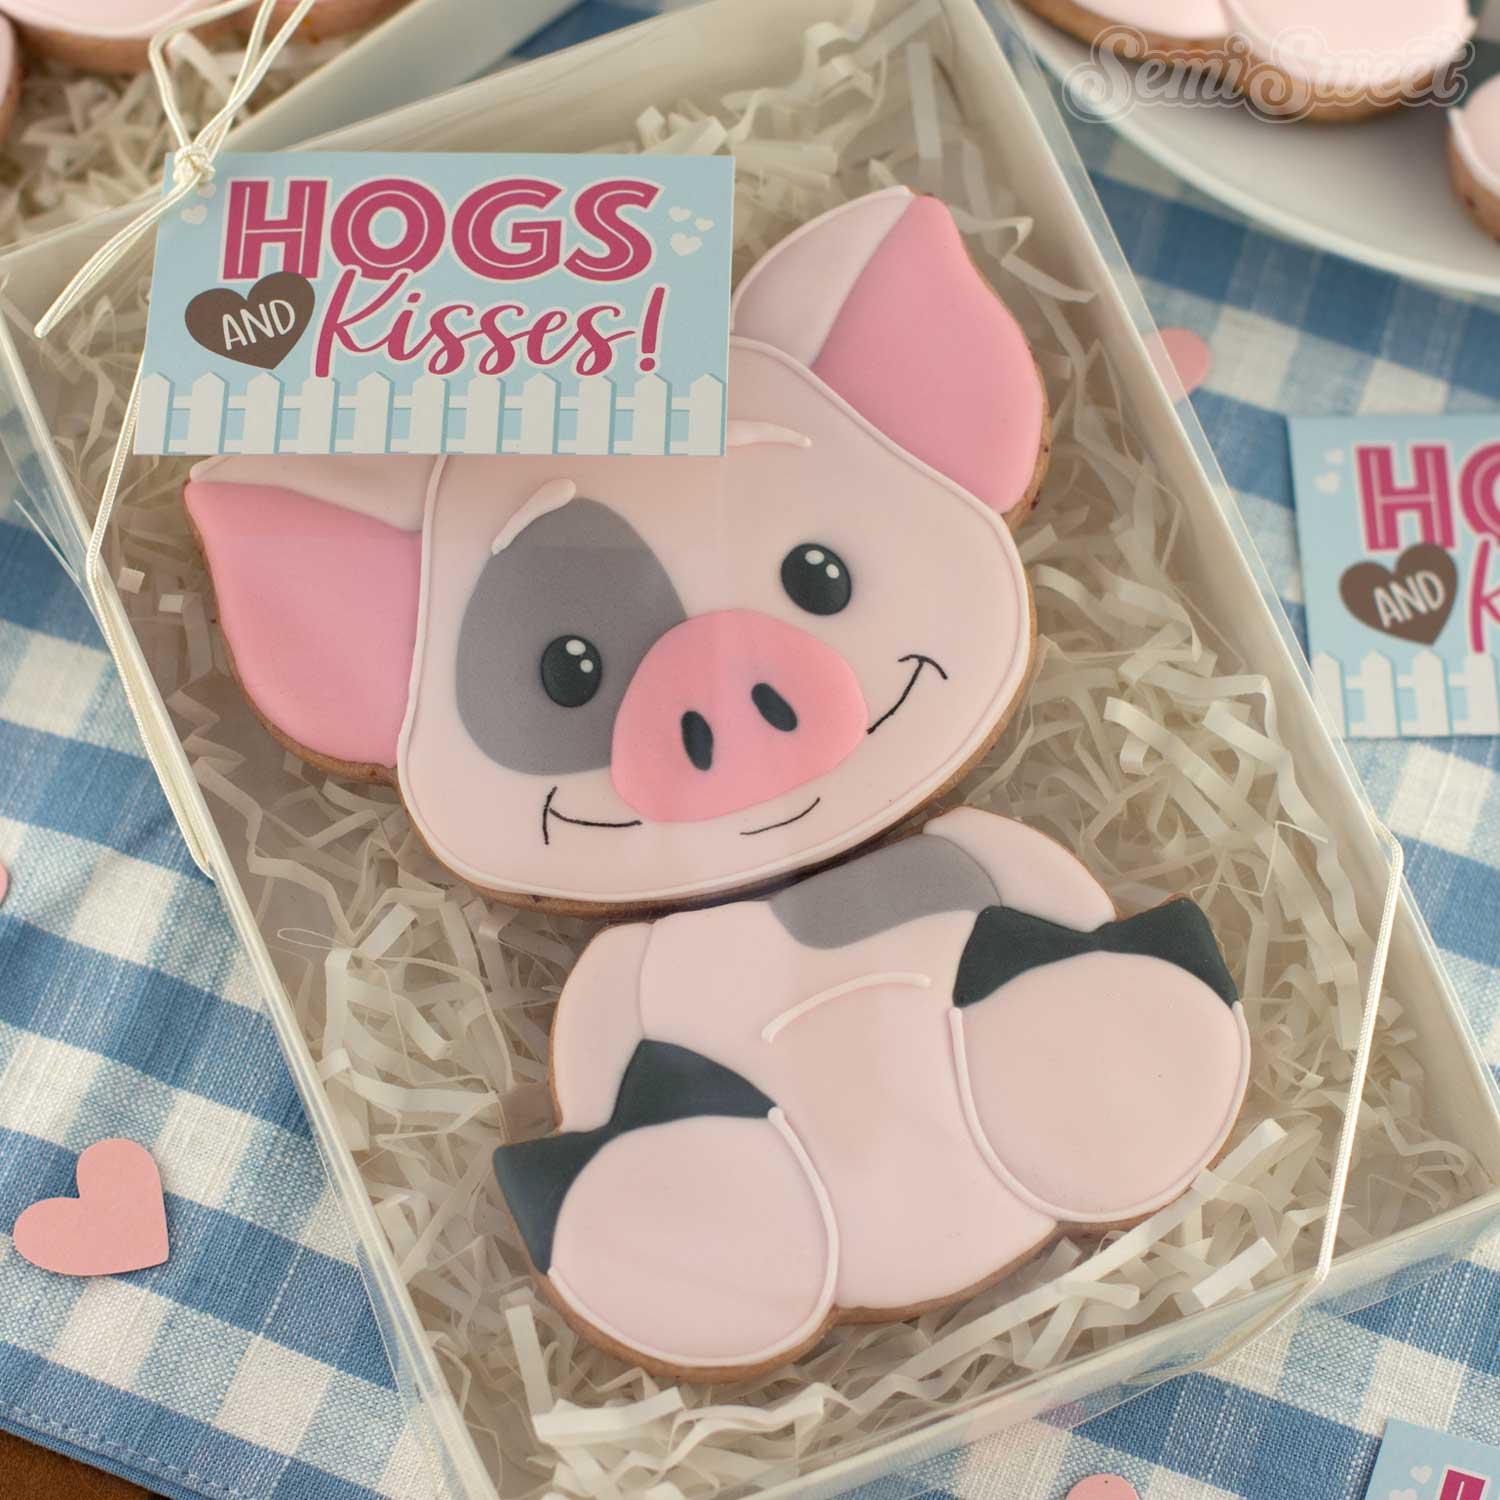 hogs and kisses tag for pig cookies for Valentine's Day